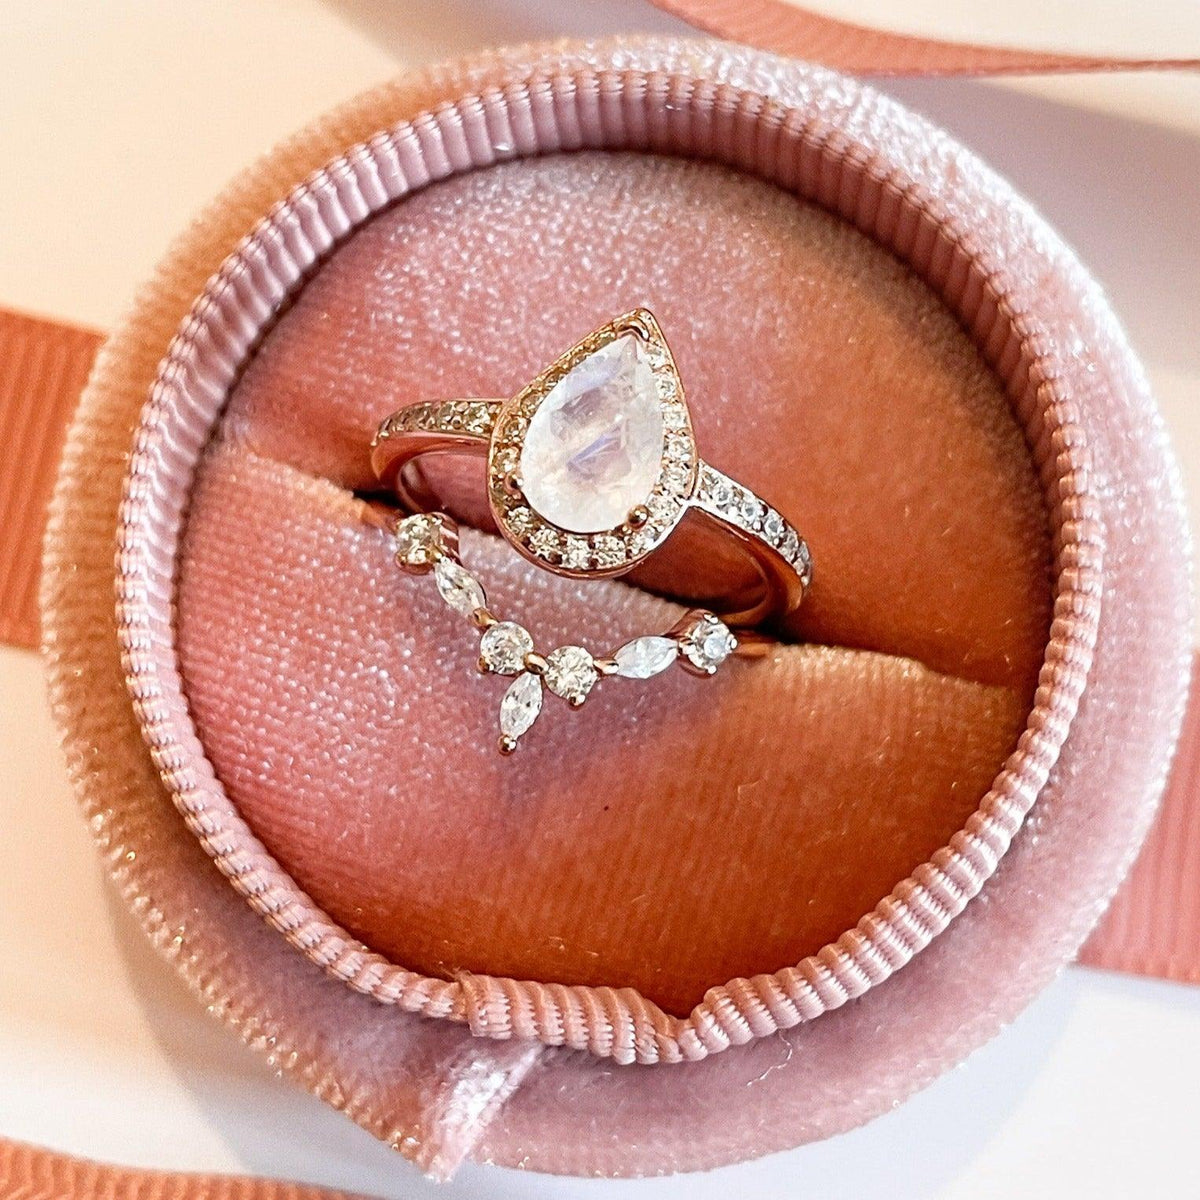 Women's Moonstone Ring In A Pink Box